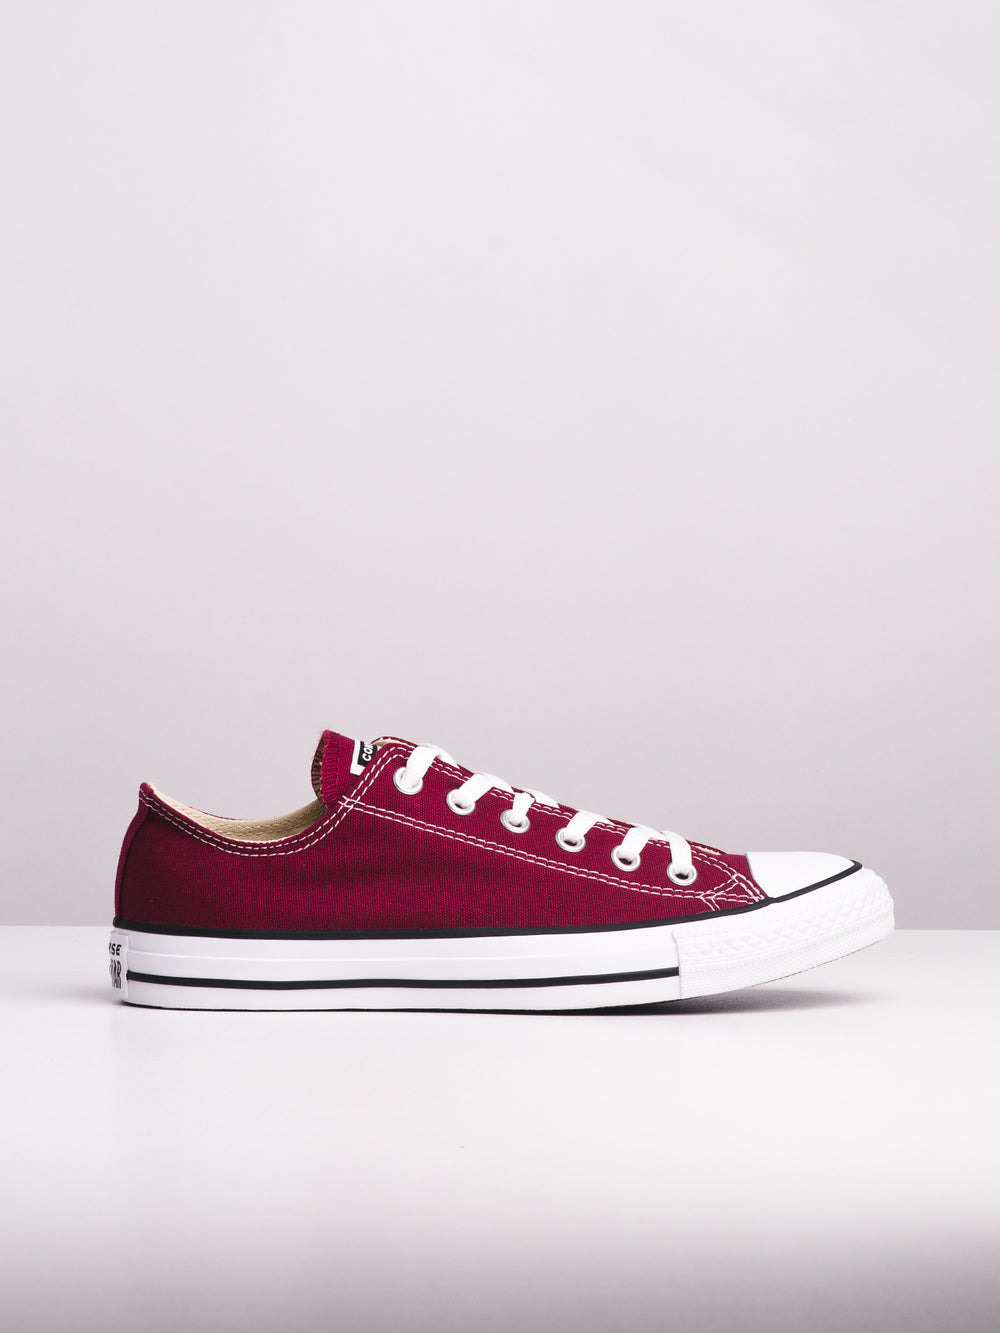 CHAUSSURES CHUCK TAYLOR ALL STAR OX POUR FEMMES